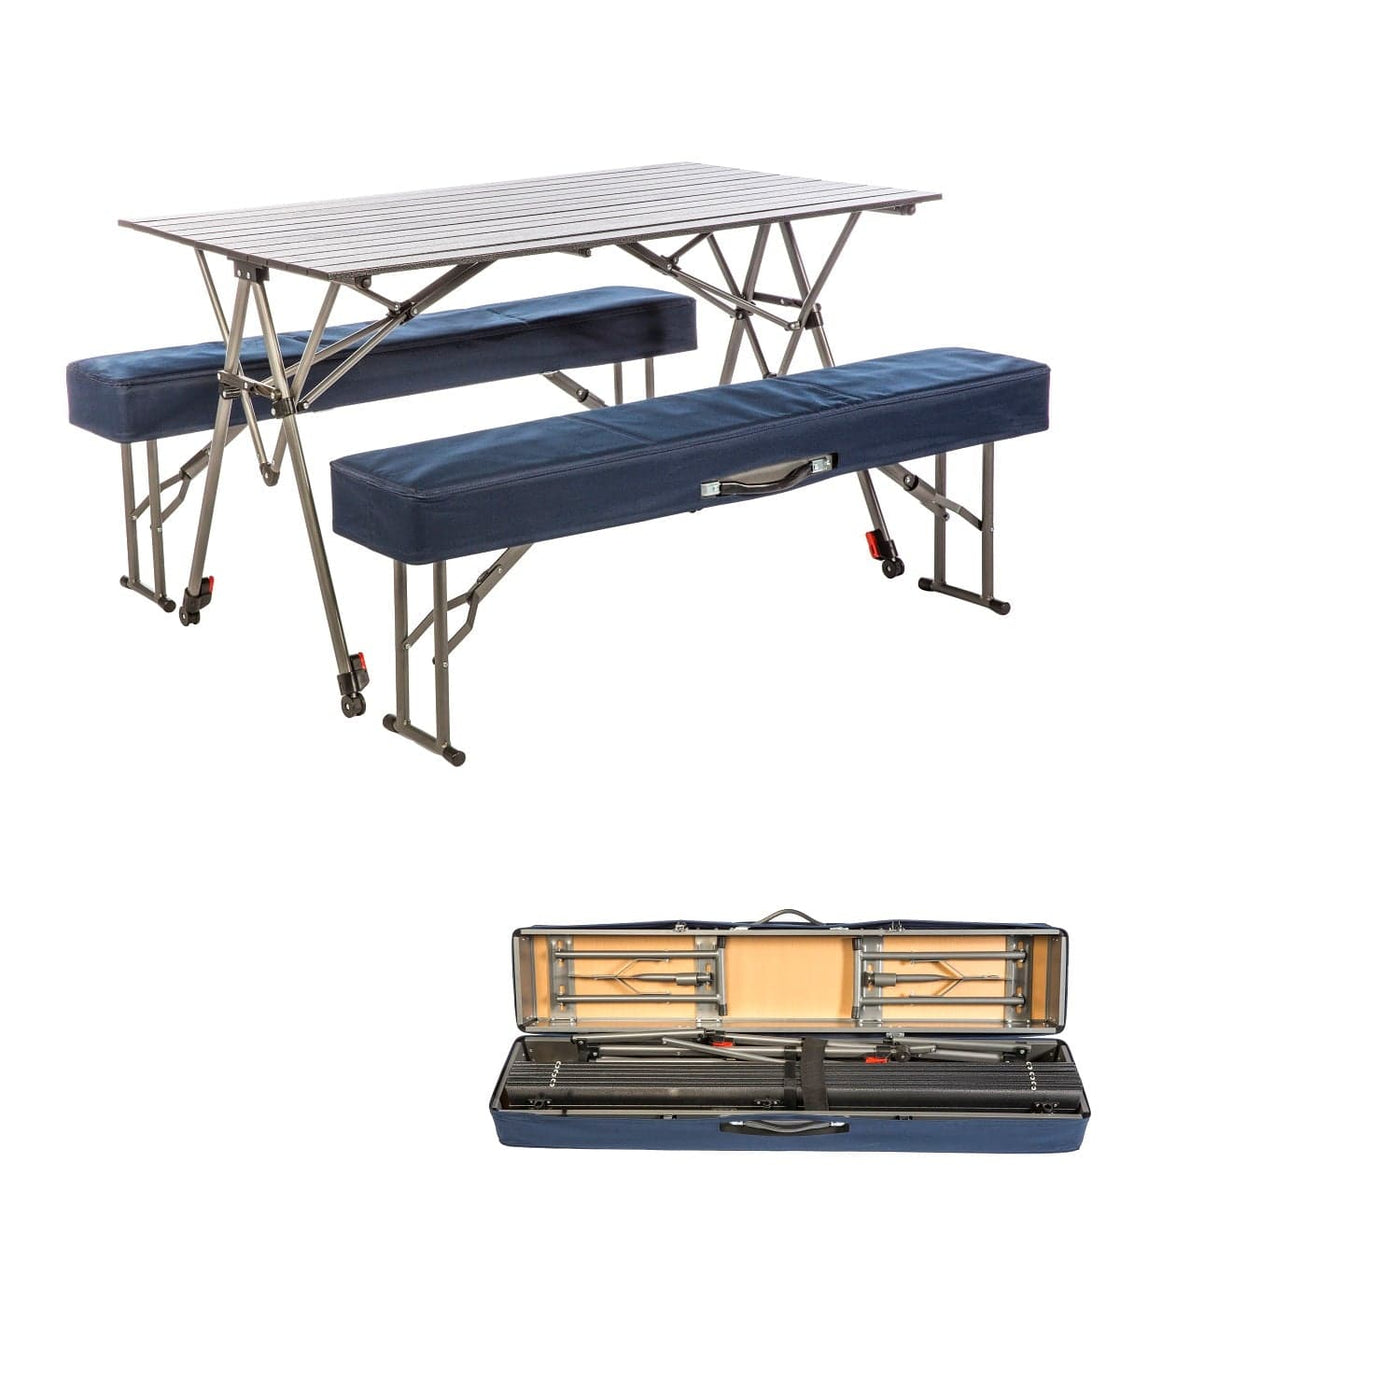 Kamp-Rite Kamp-Rite Kwik Set Table with Benches Camping And Outdoor